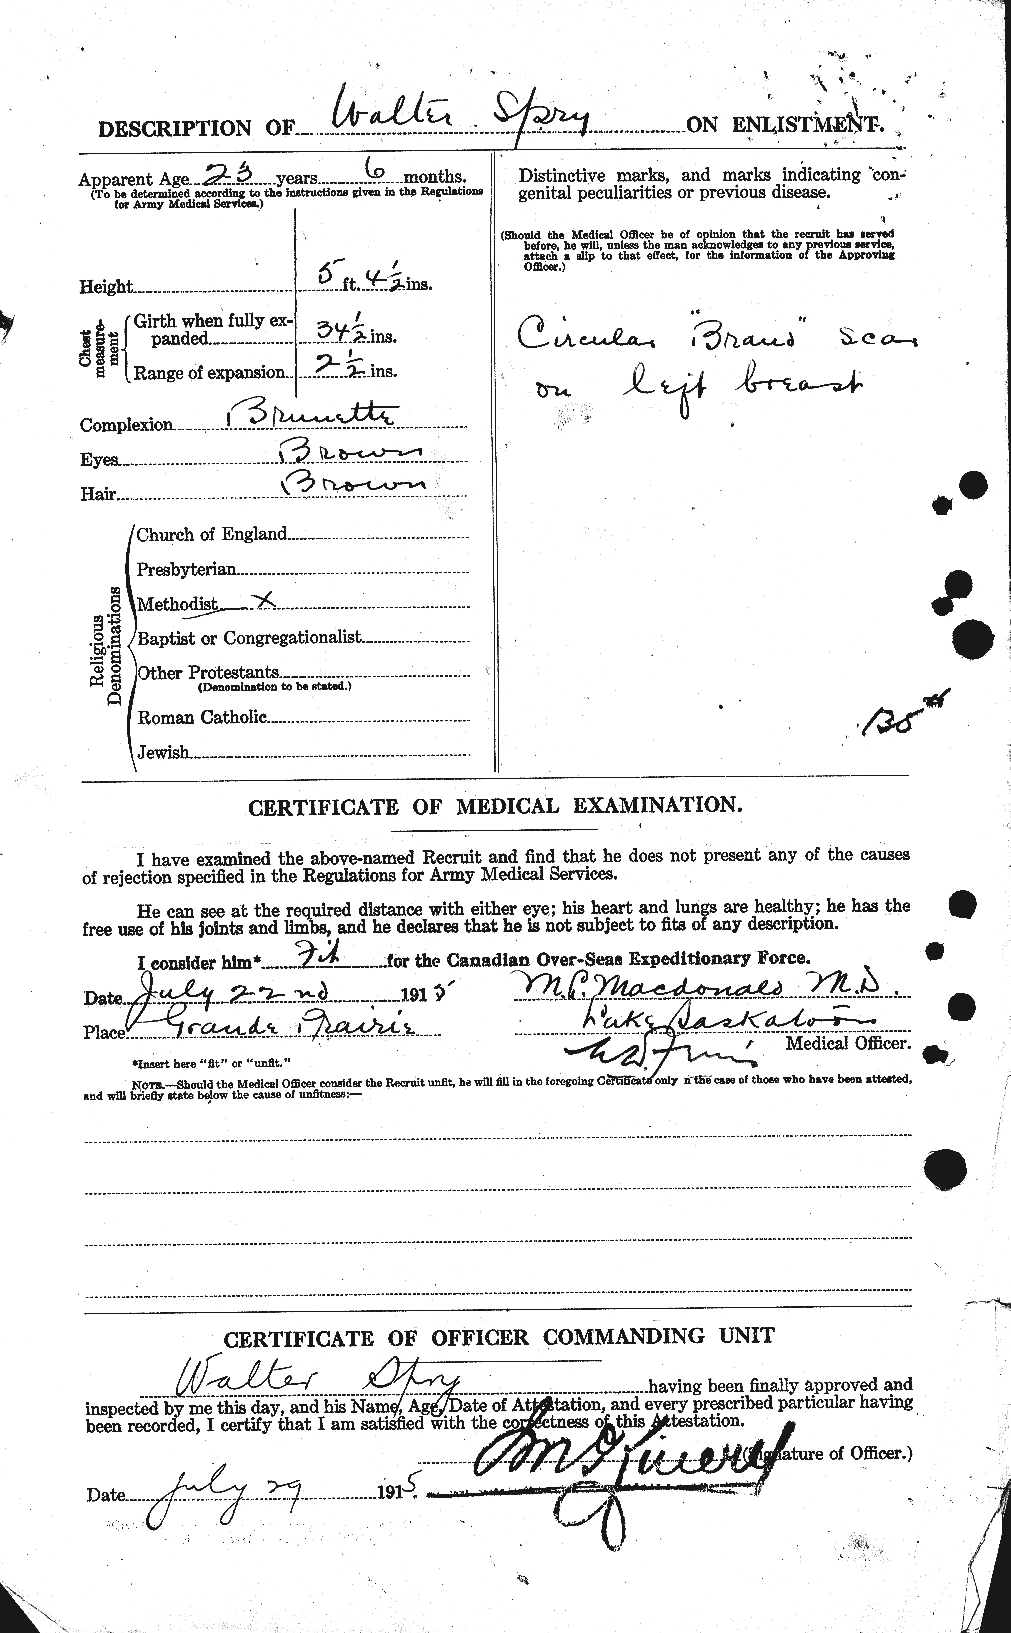 Personnel Records of the First World War - CEF 115522b